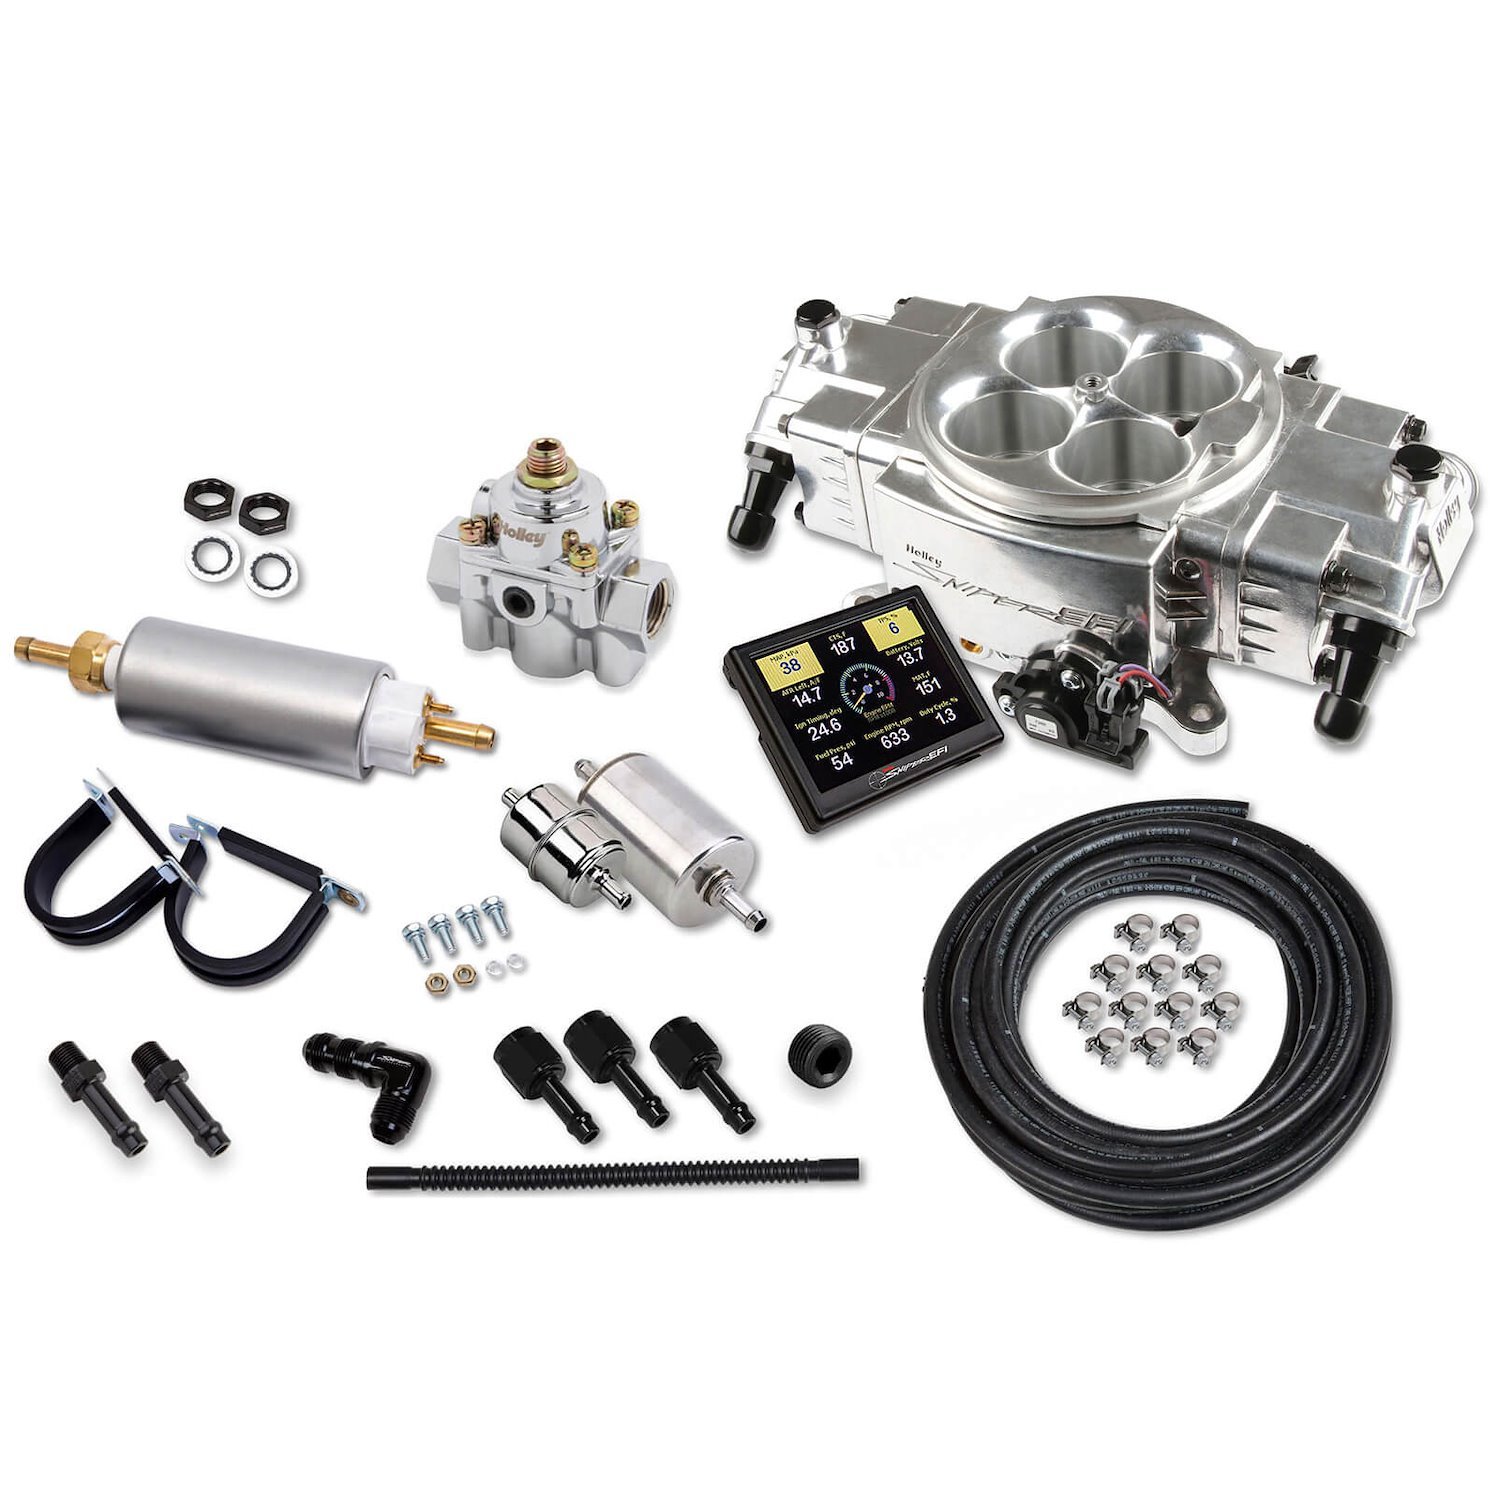 550-870K Sniper Stealth 4150 Self-Tuning Fuel Injection System Master Kit